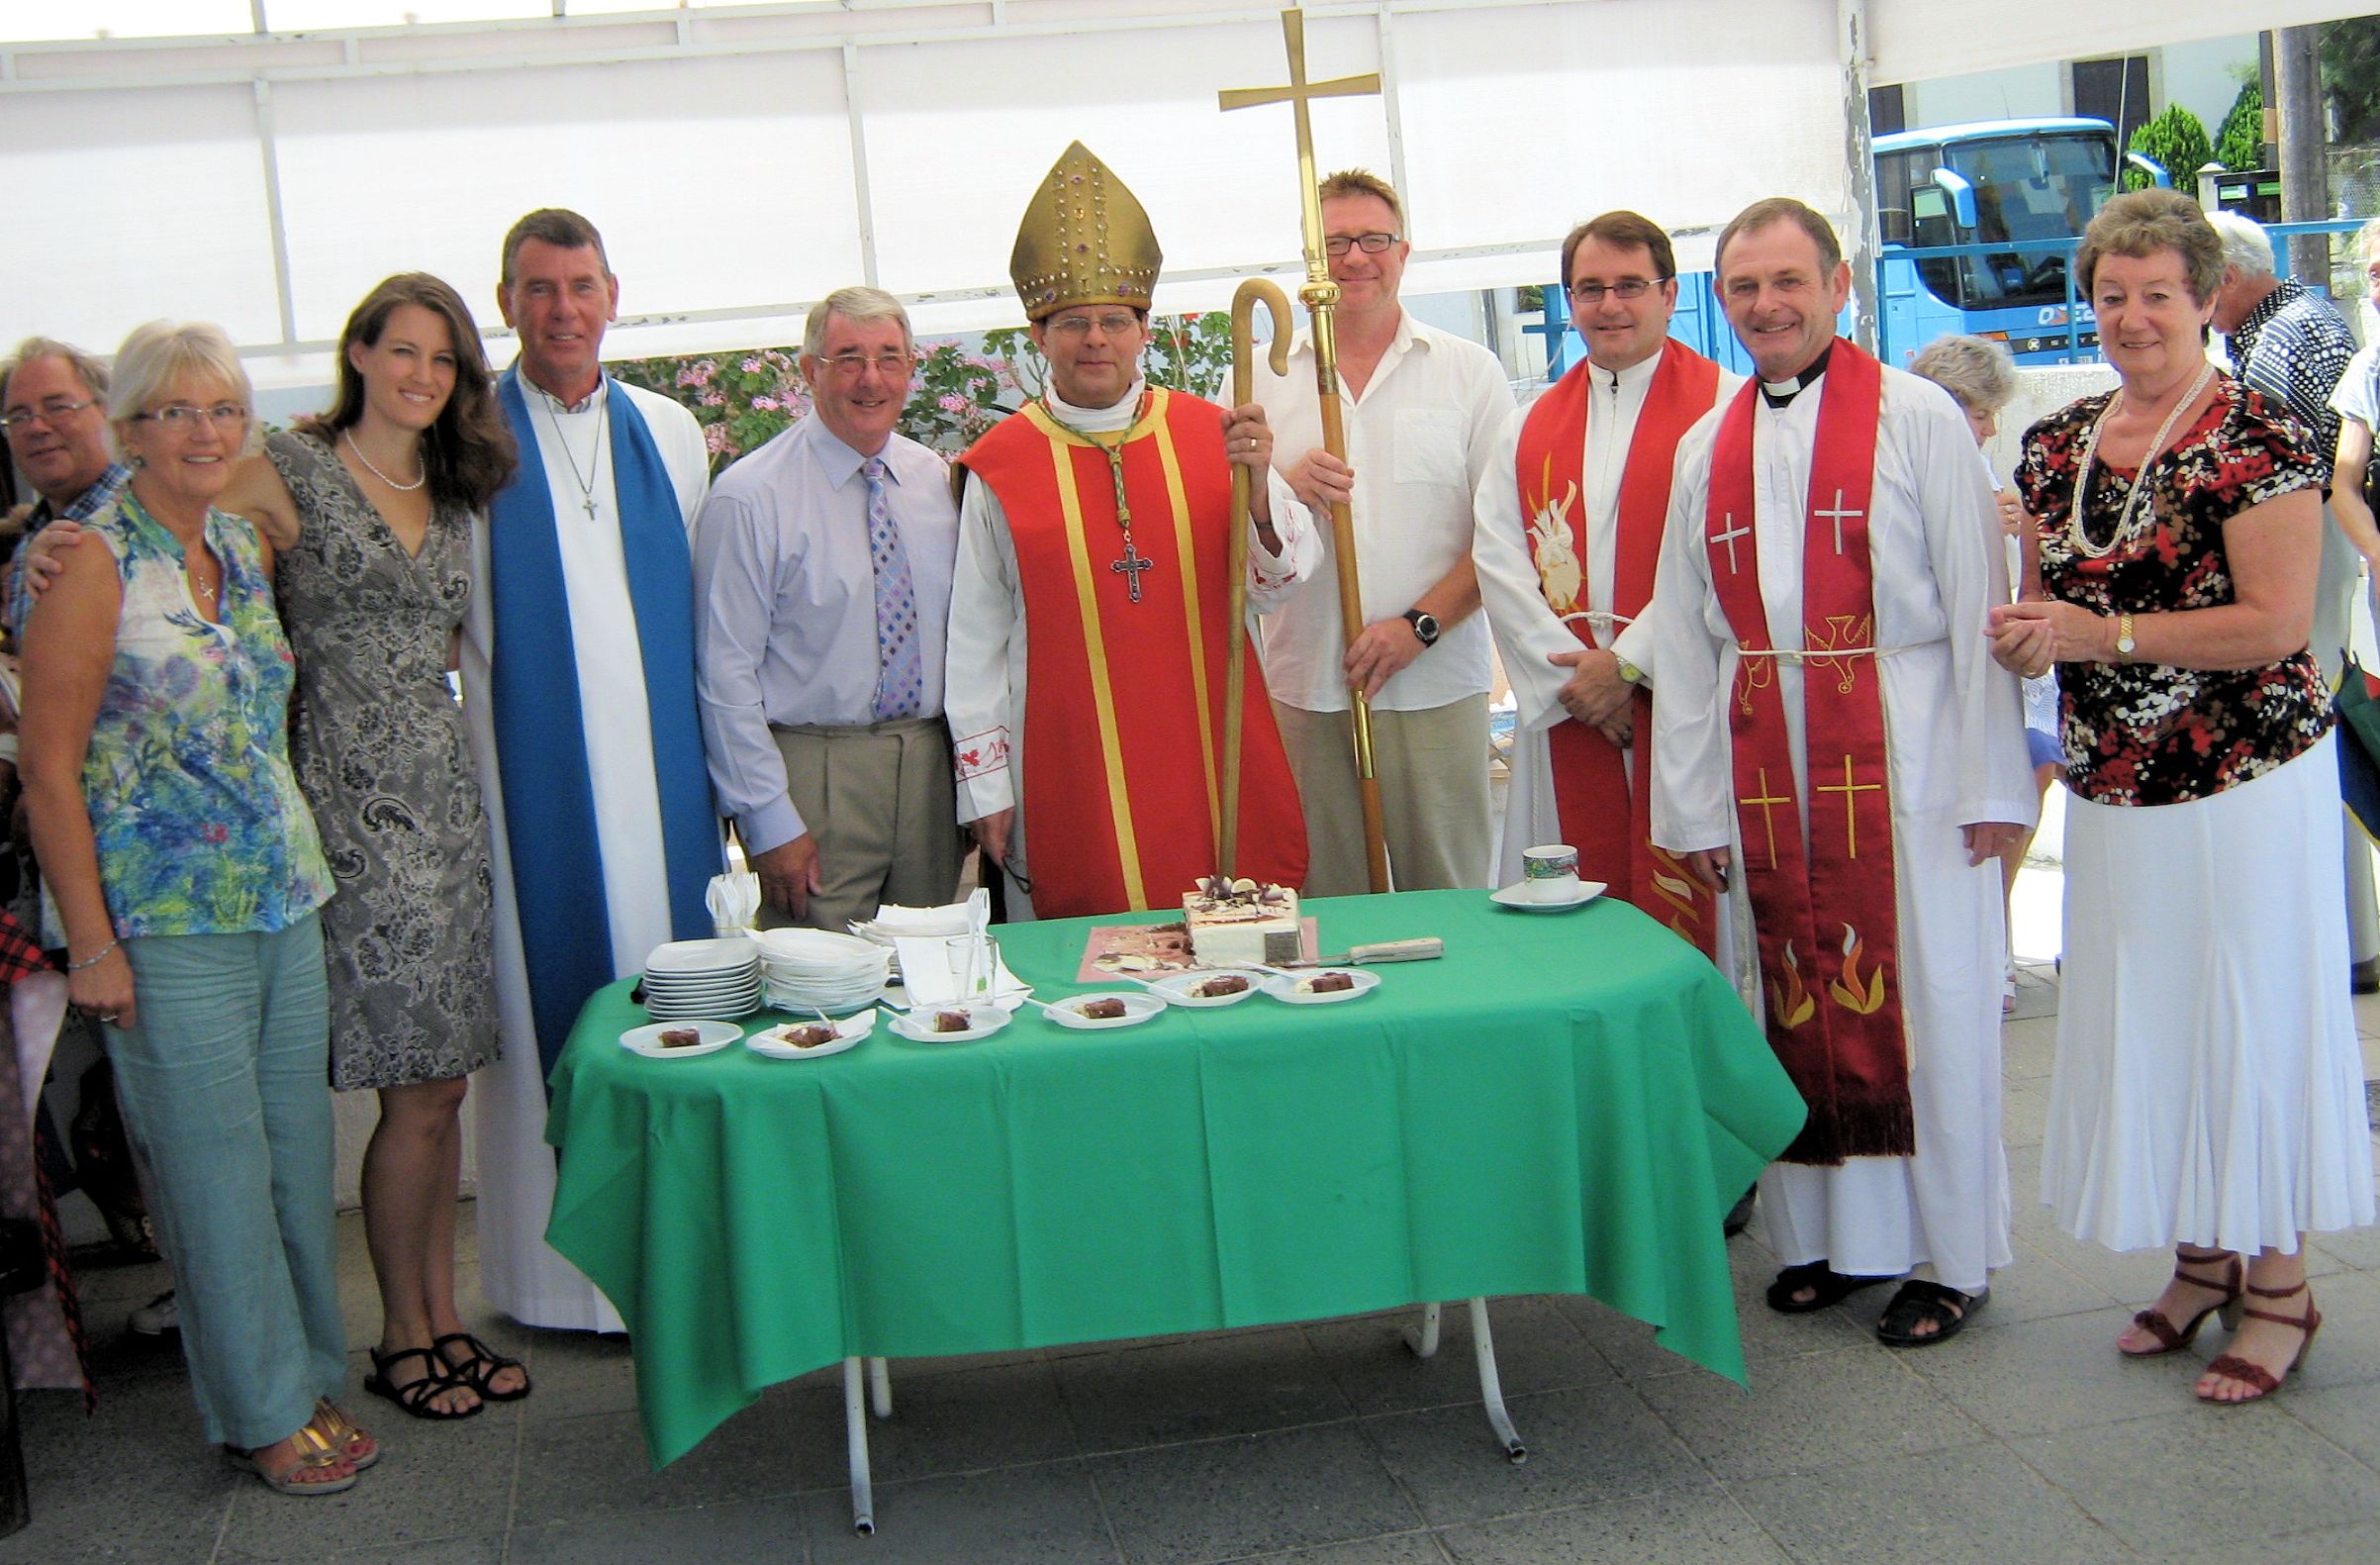 group with the Bishop